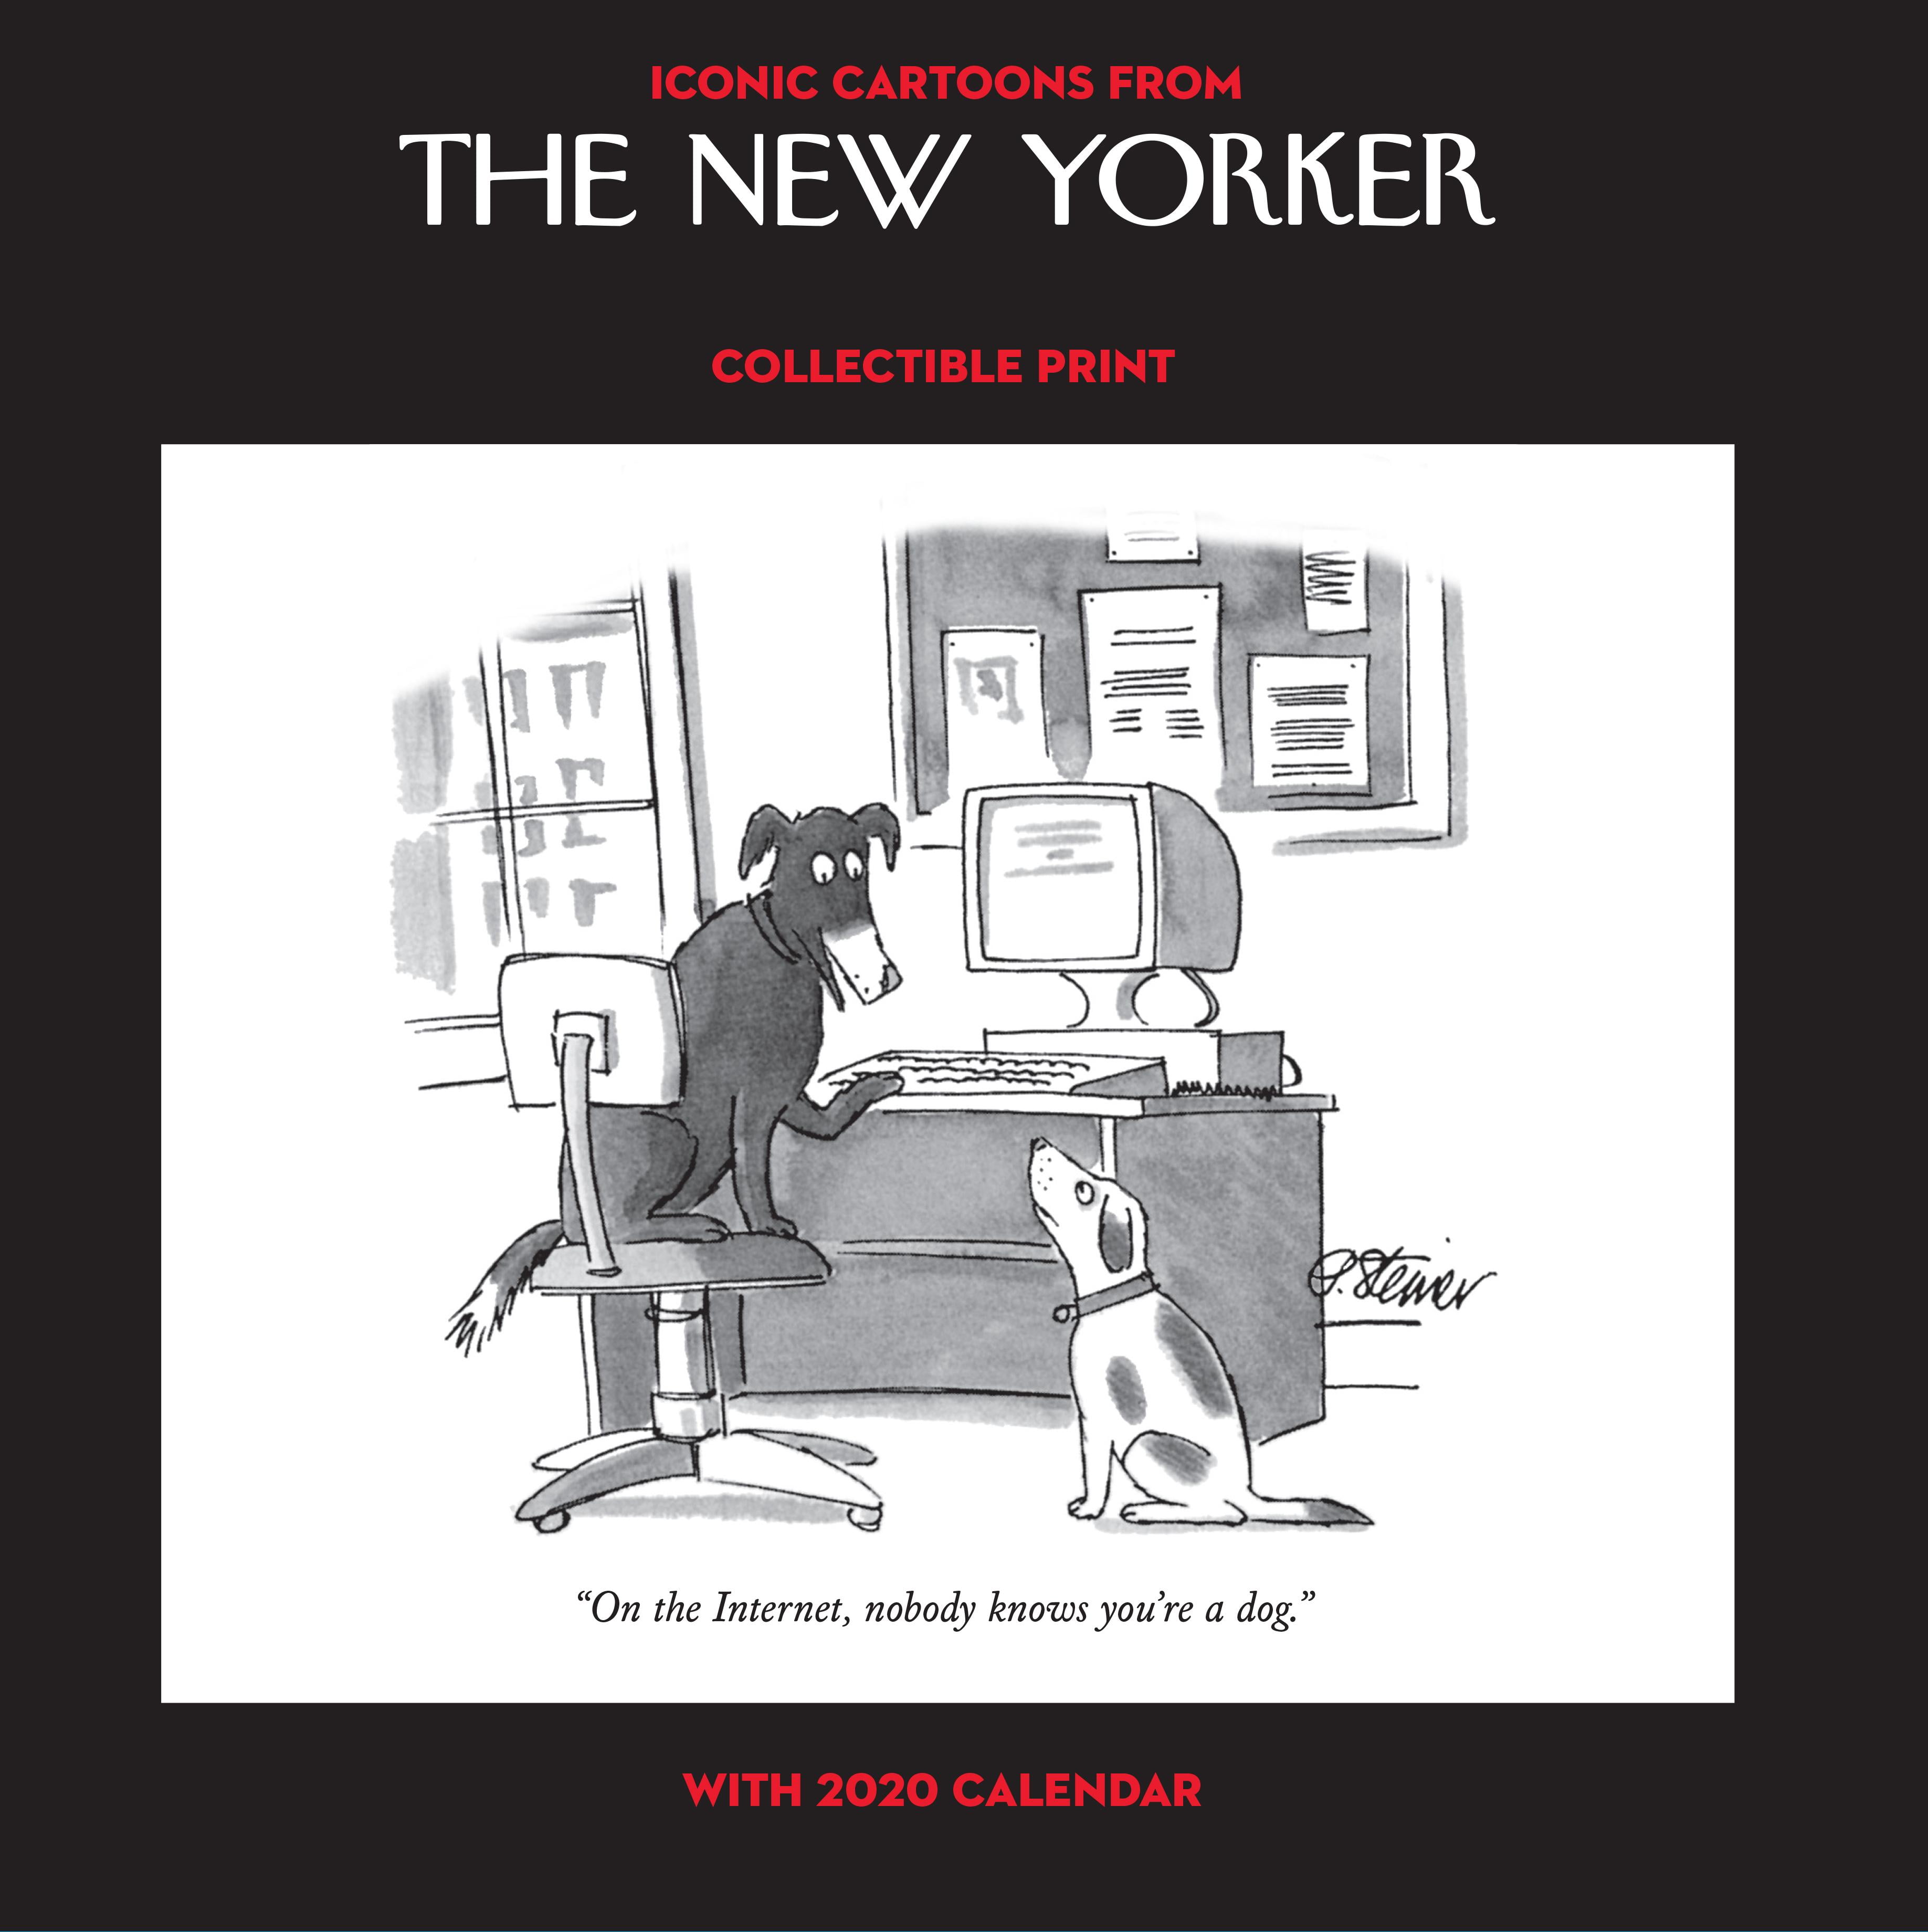 Cartoons from The New Yorker 2020 Collectible Print with Wall Calendar